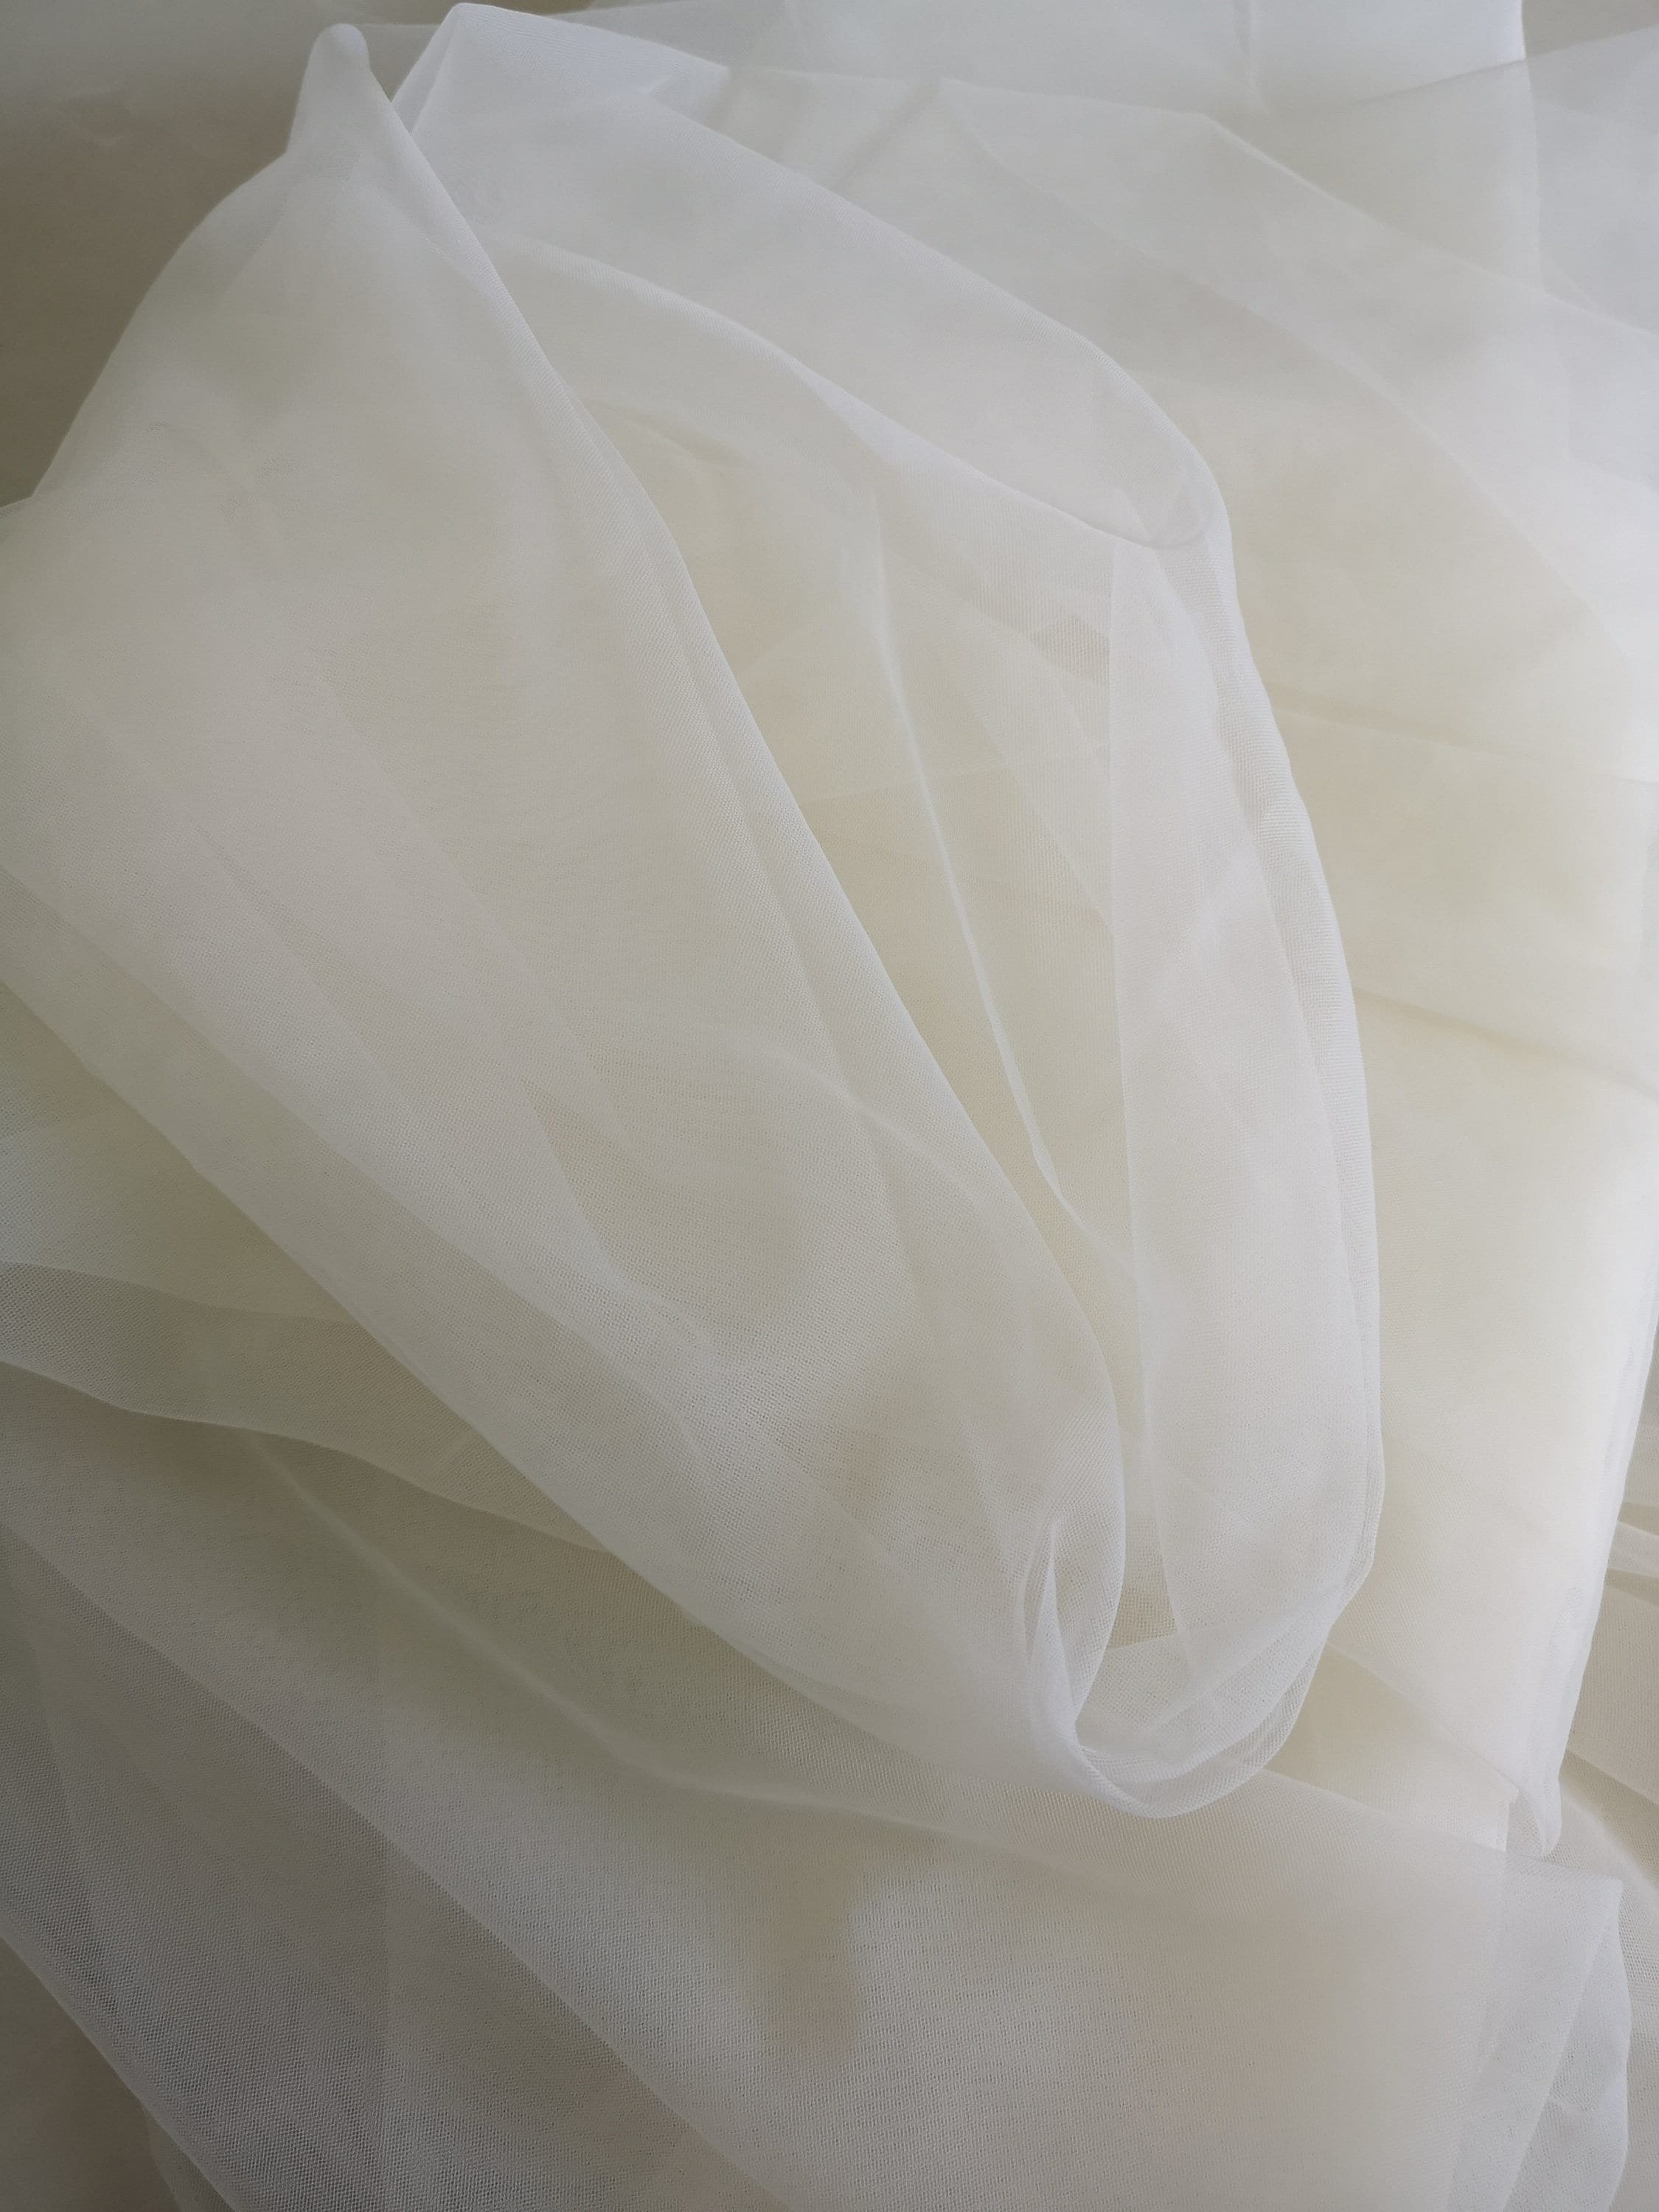 Soft Veils Tulle Fabric,wedding Bridal Dress Mesh Fabric,champagne Tulle 